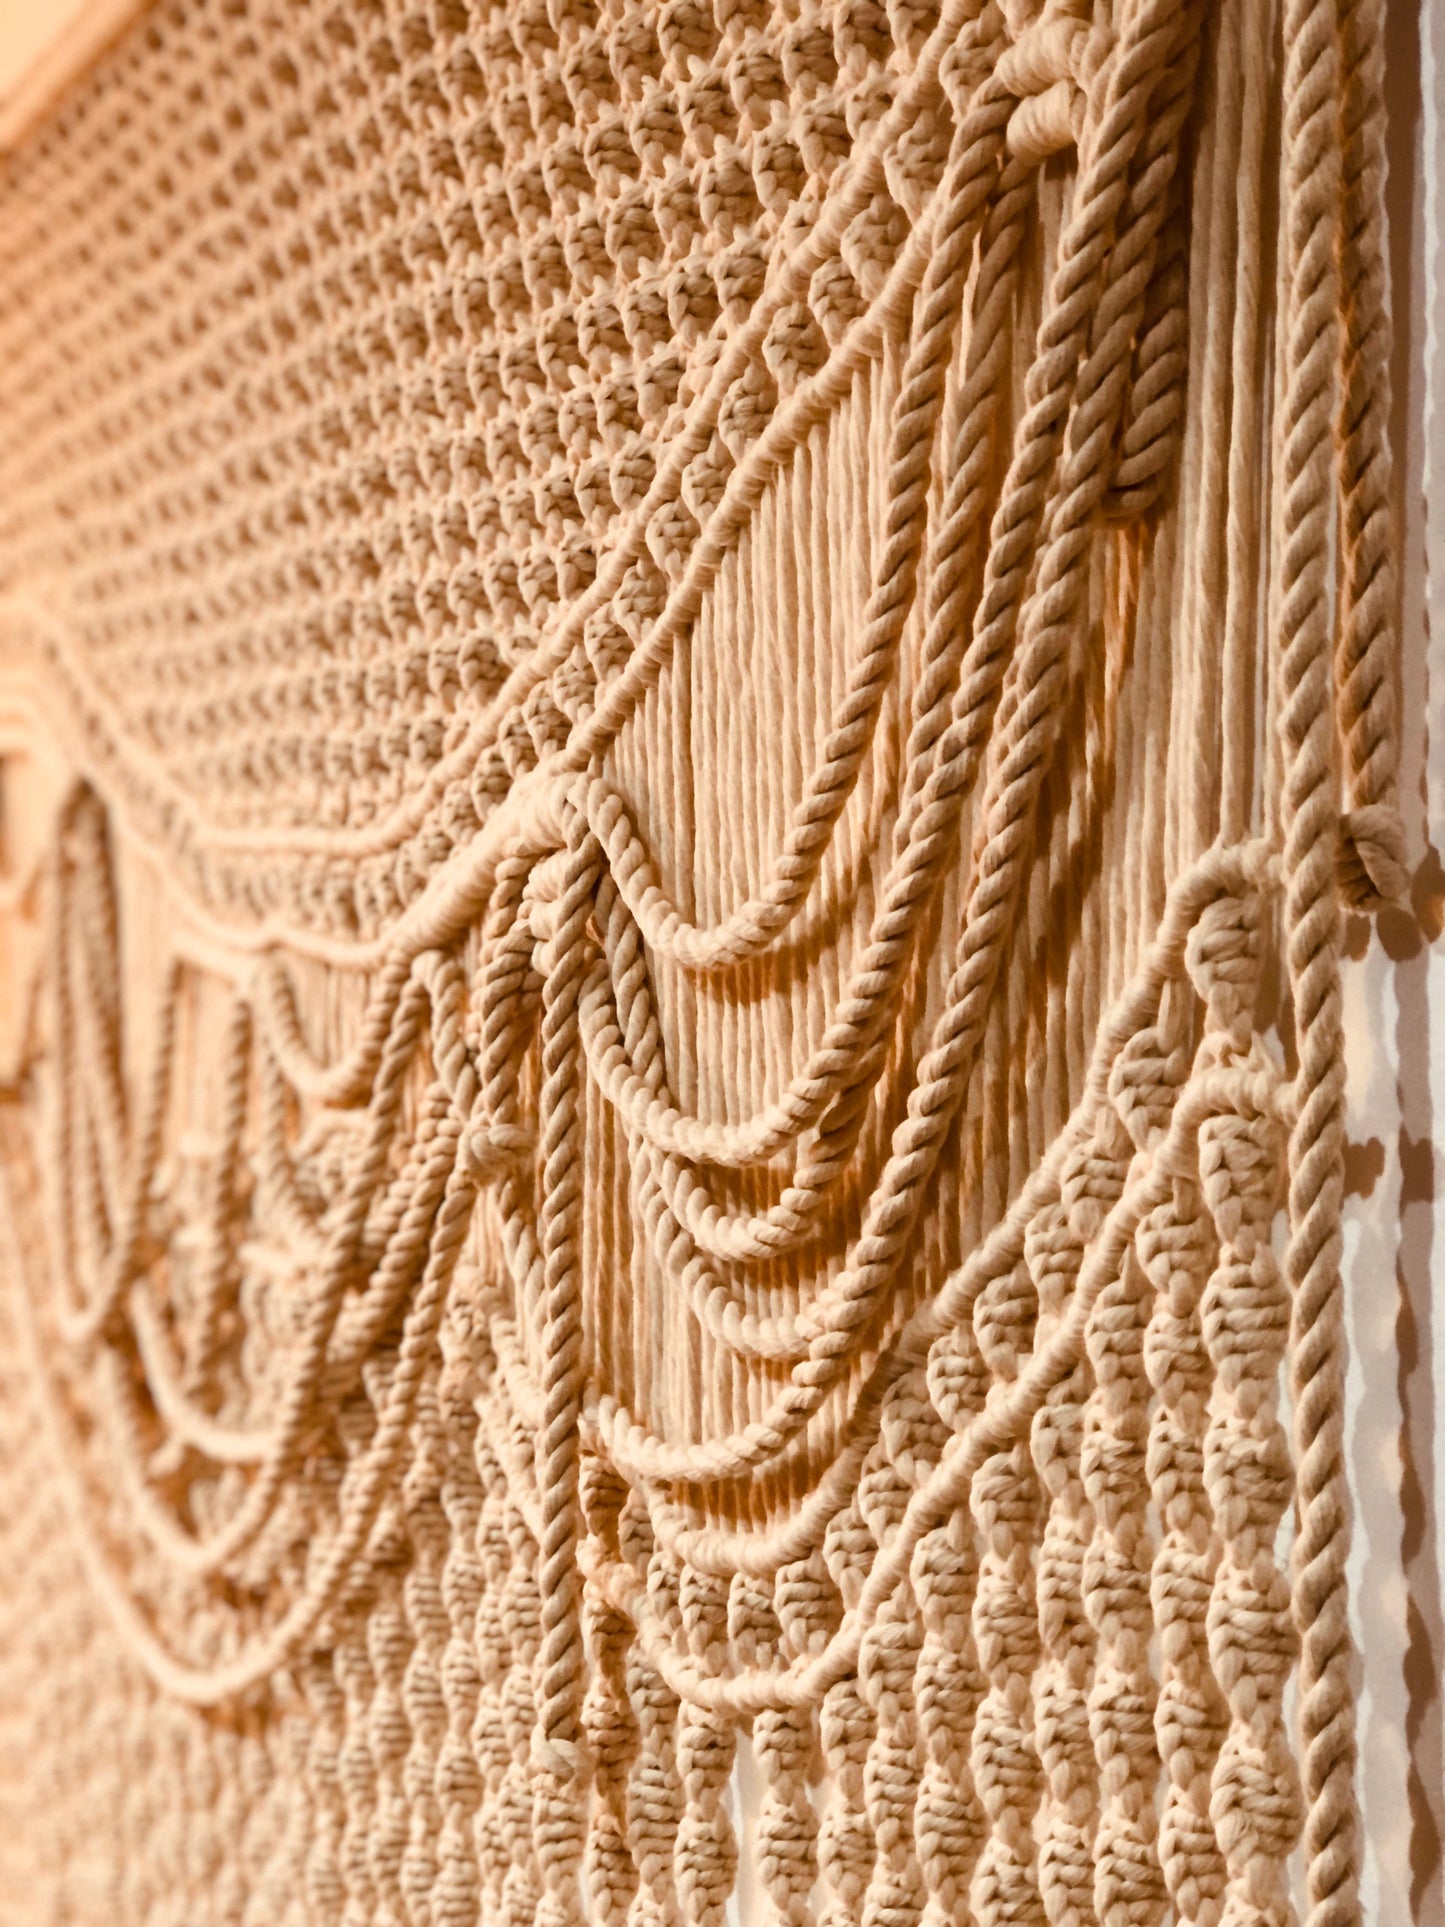 Contemporary Macrame Wall Hanging - Knotted by Hand